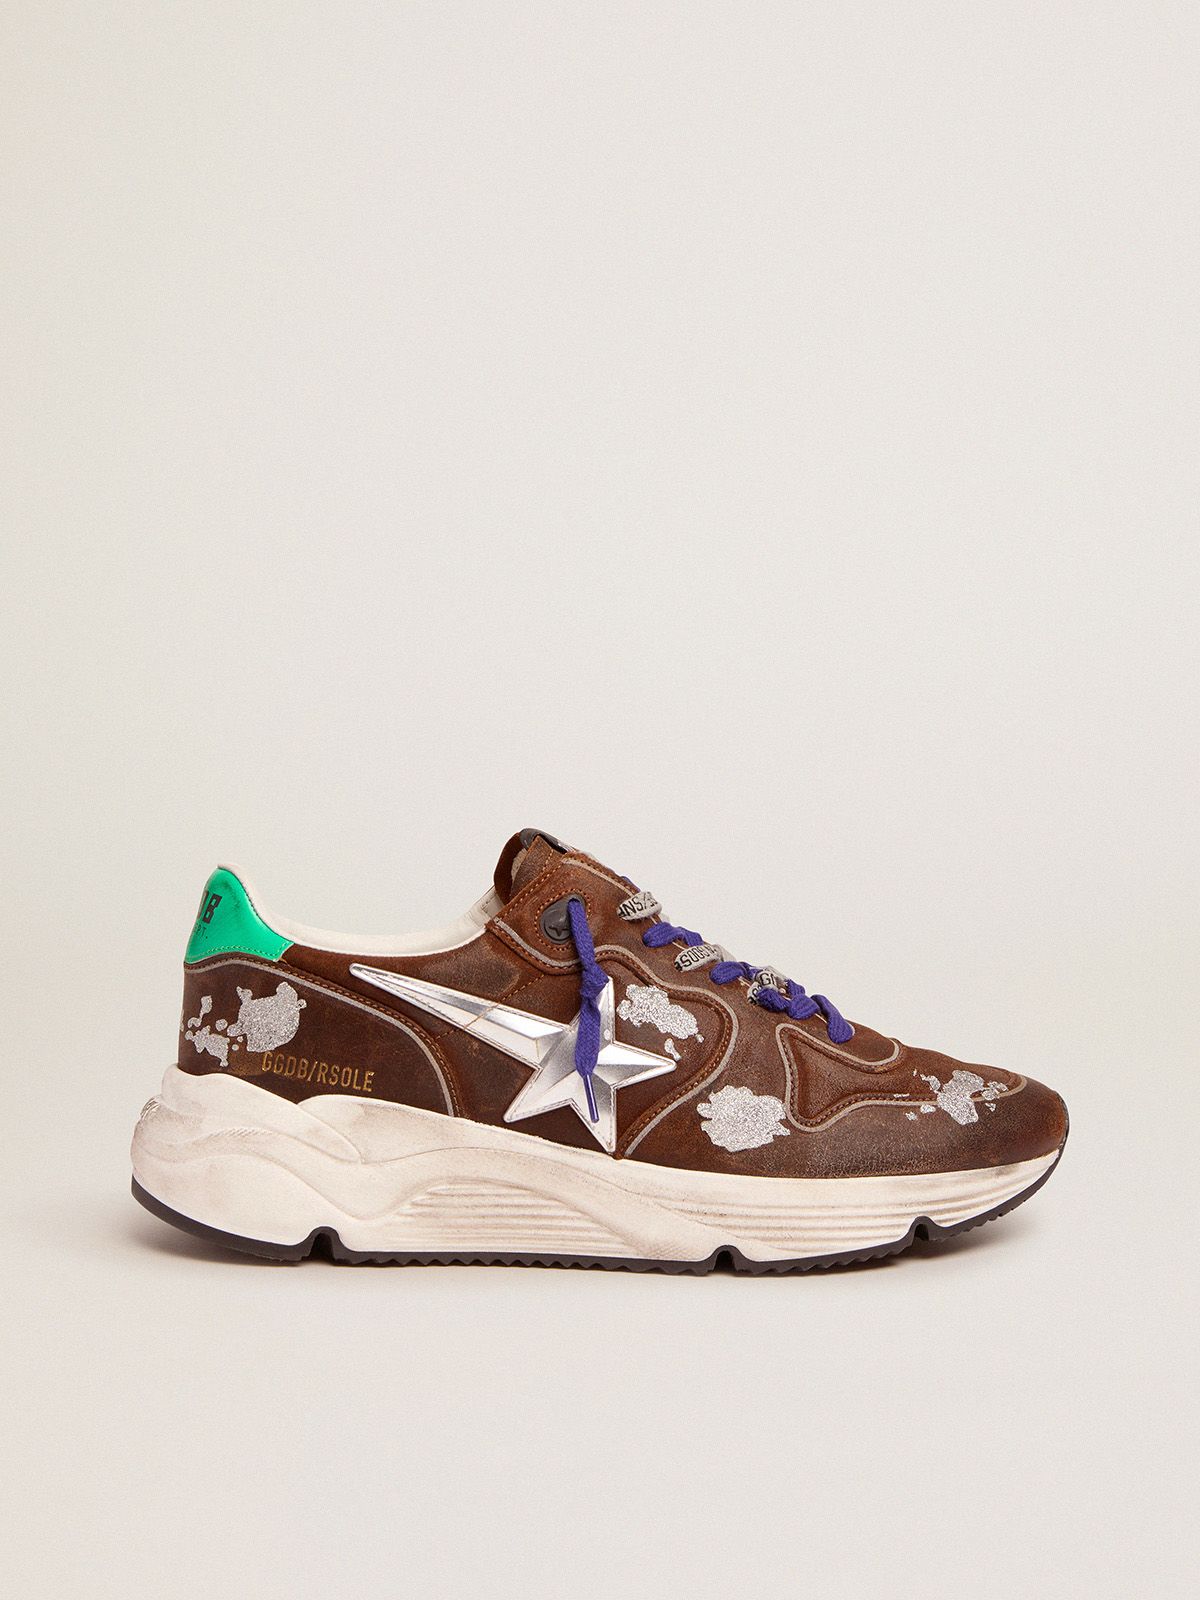 Running Sole sneakers in cognac-colored suede with 3D star